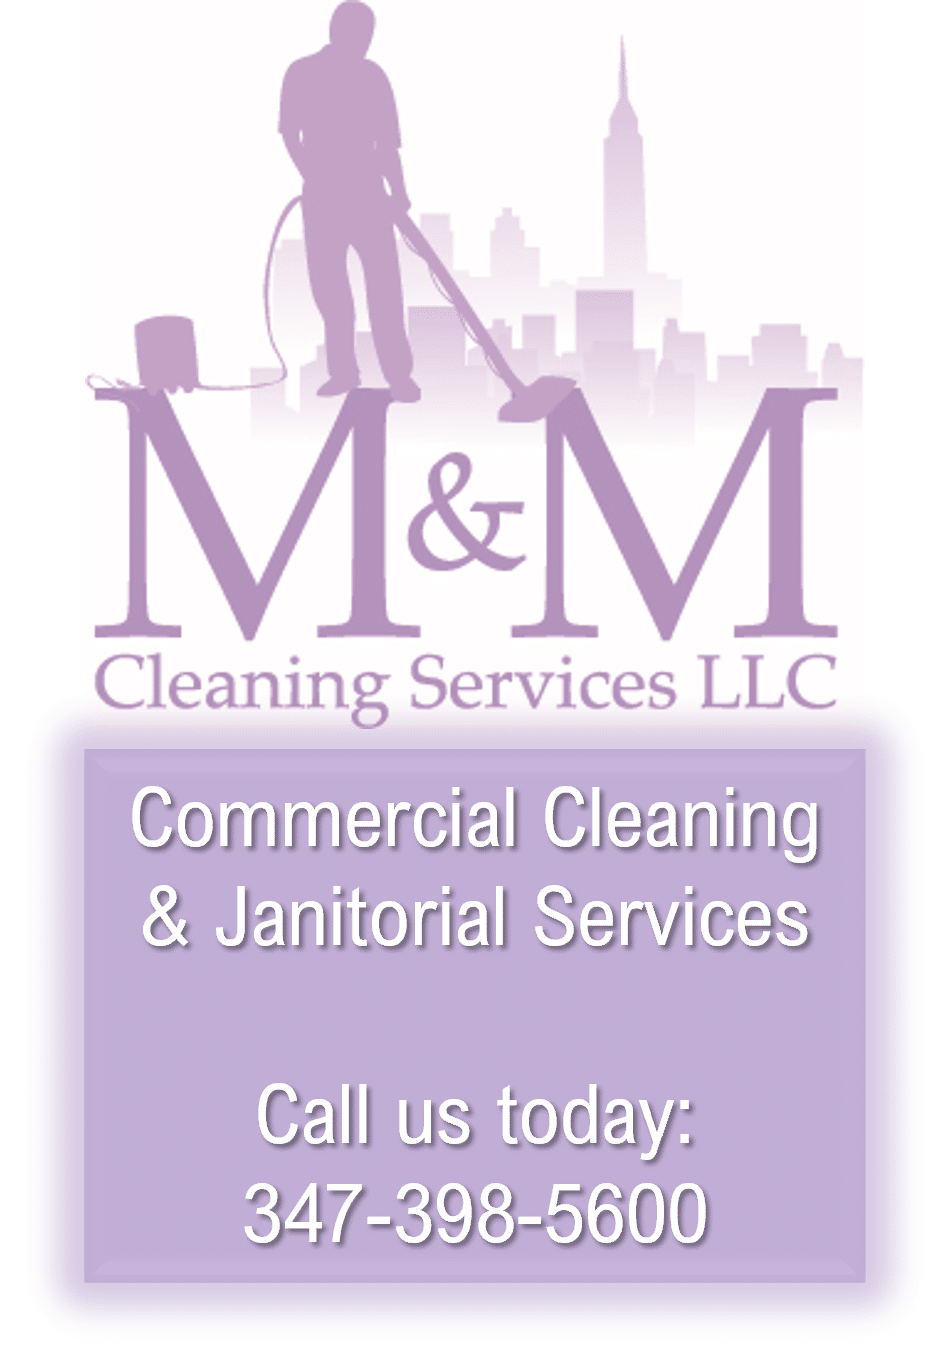 M+M Cleaning logo